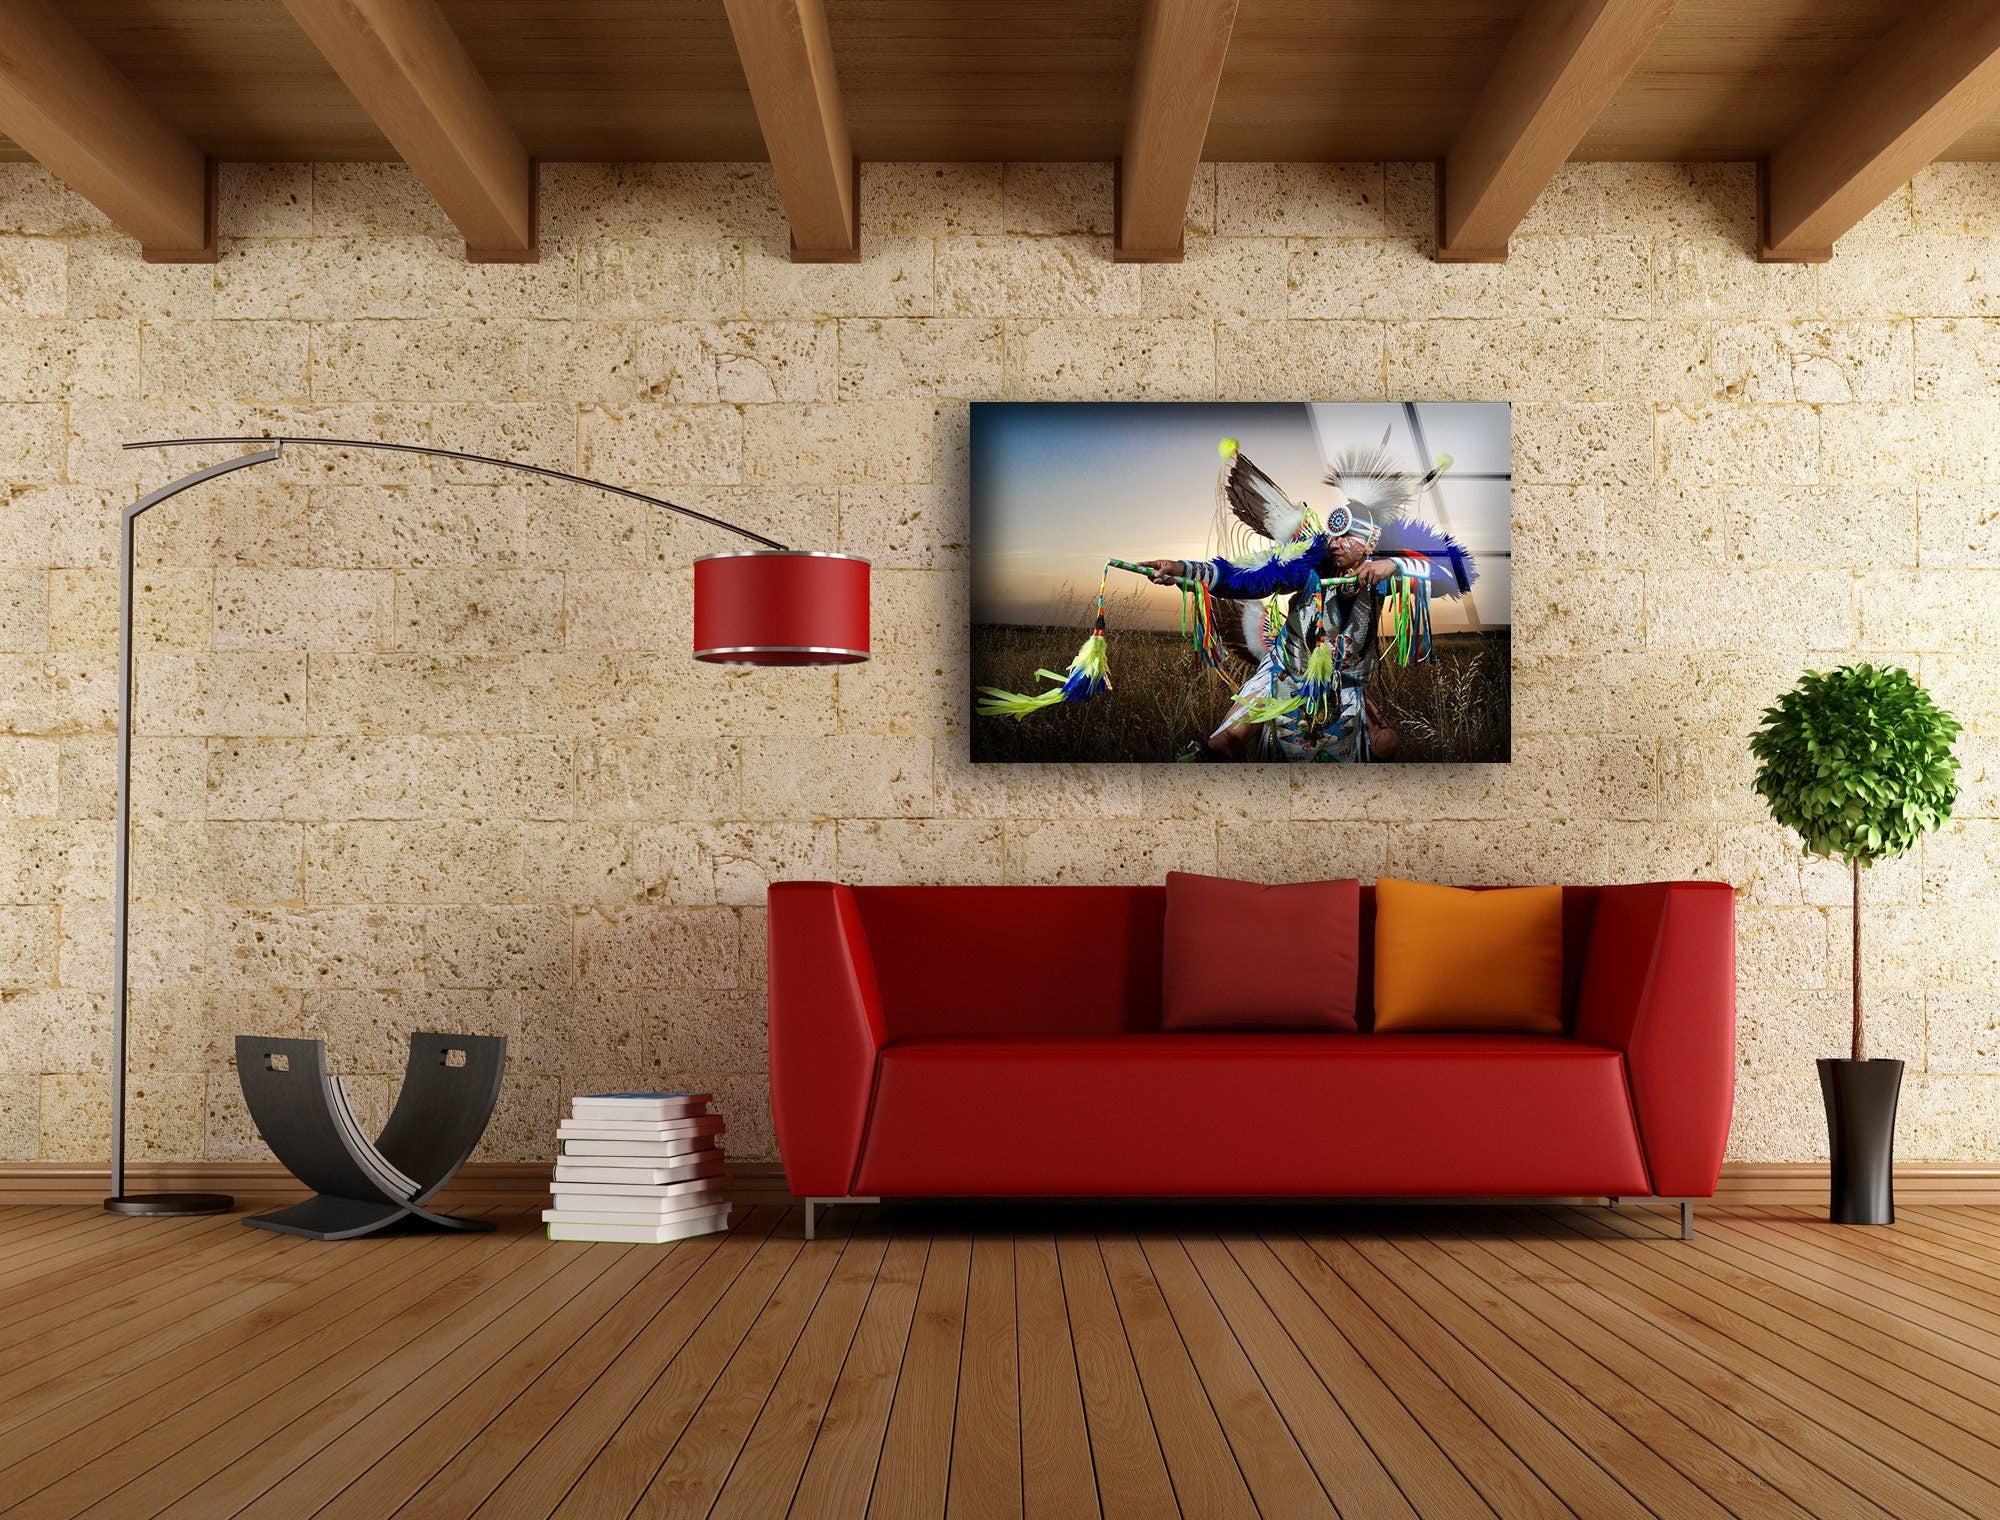 Native American Tempered Glass Wall Art